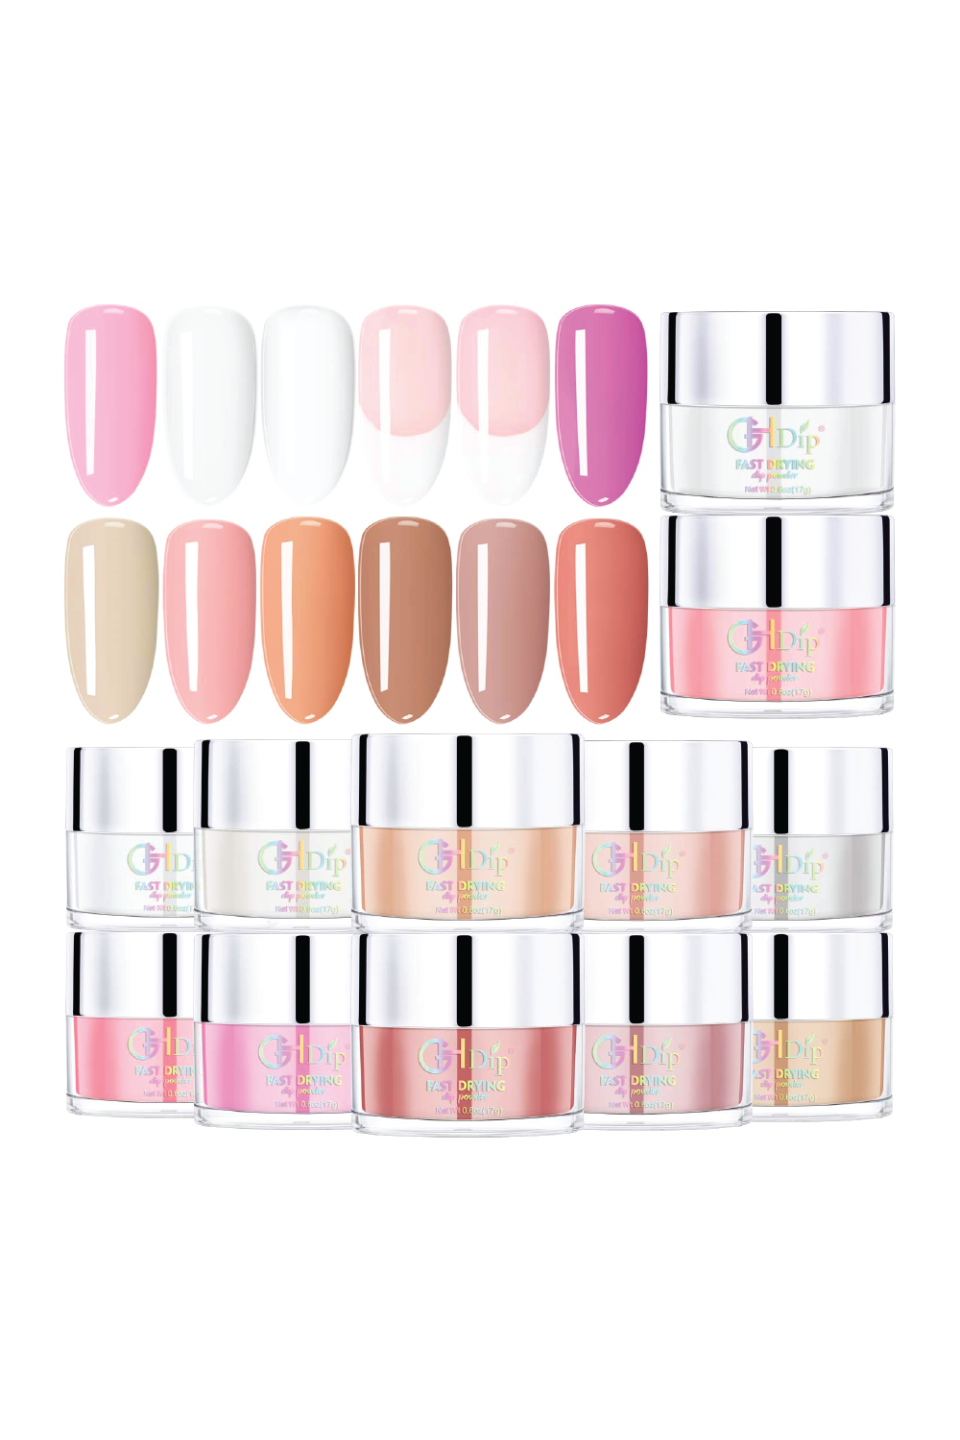 GHDIP Dip Powder for French Nail Manicure